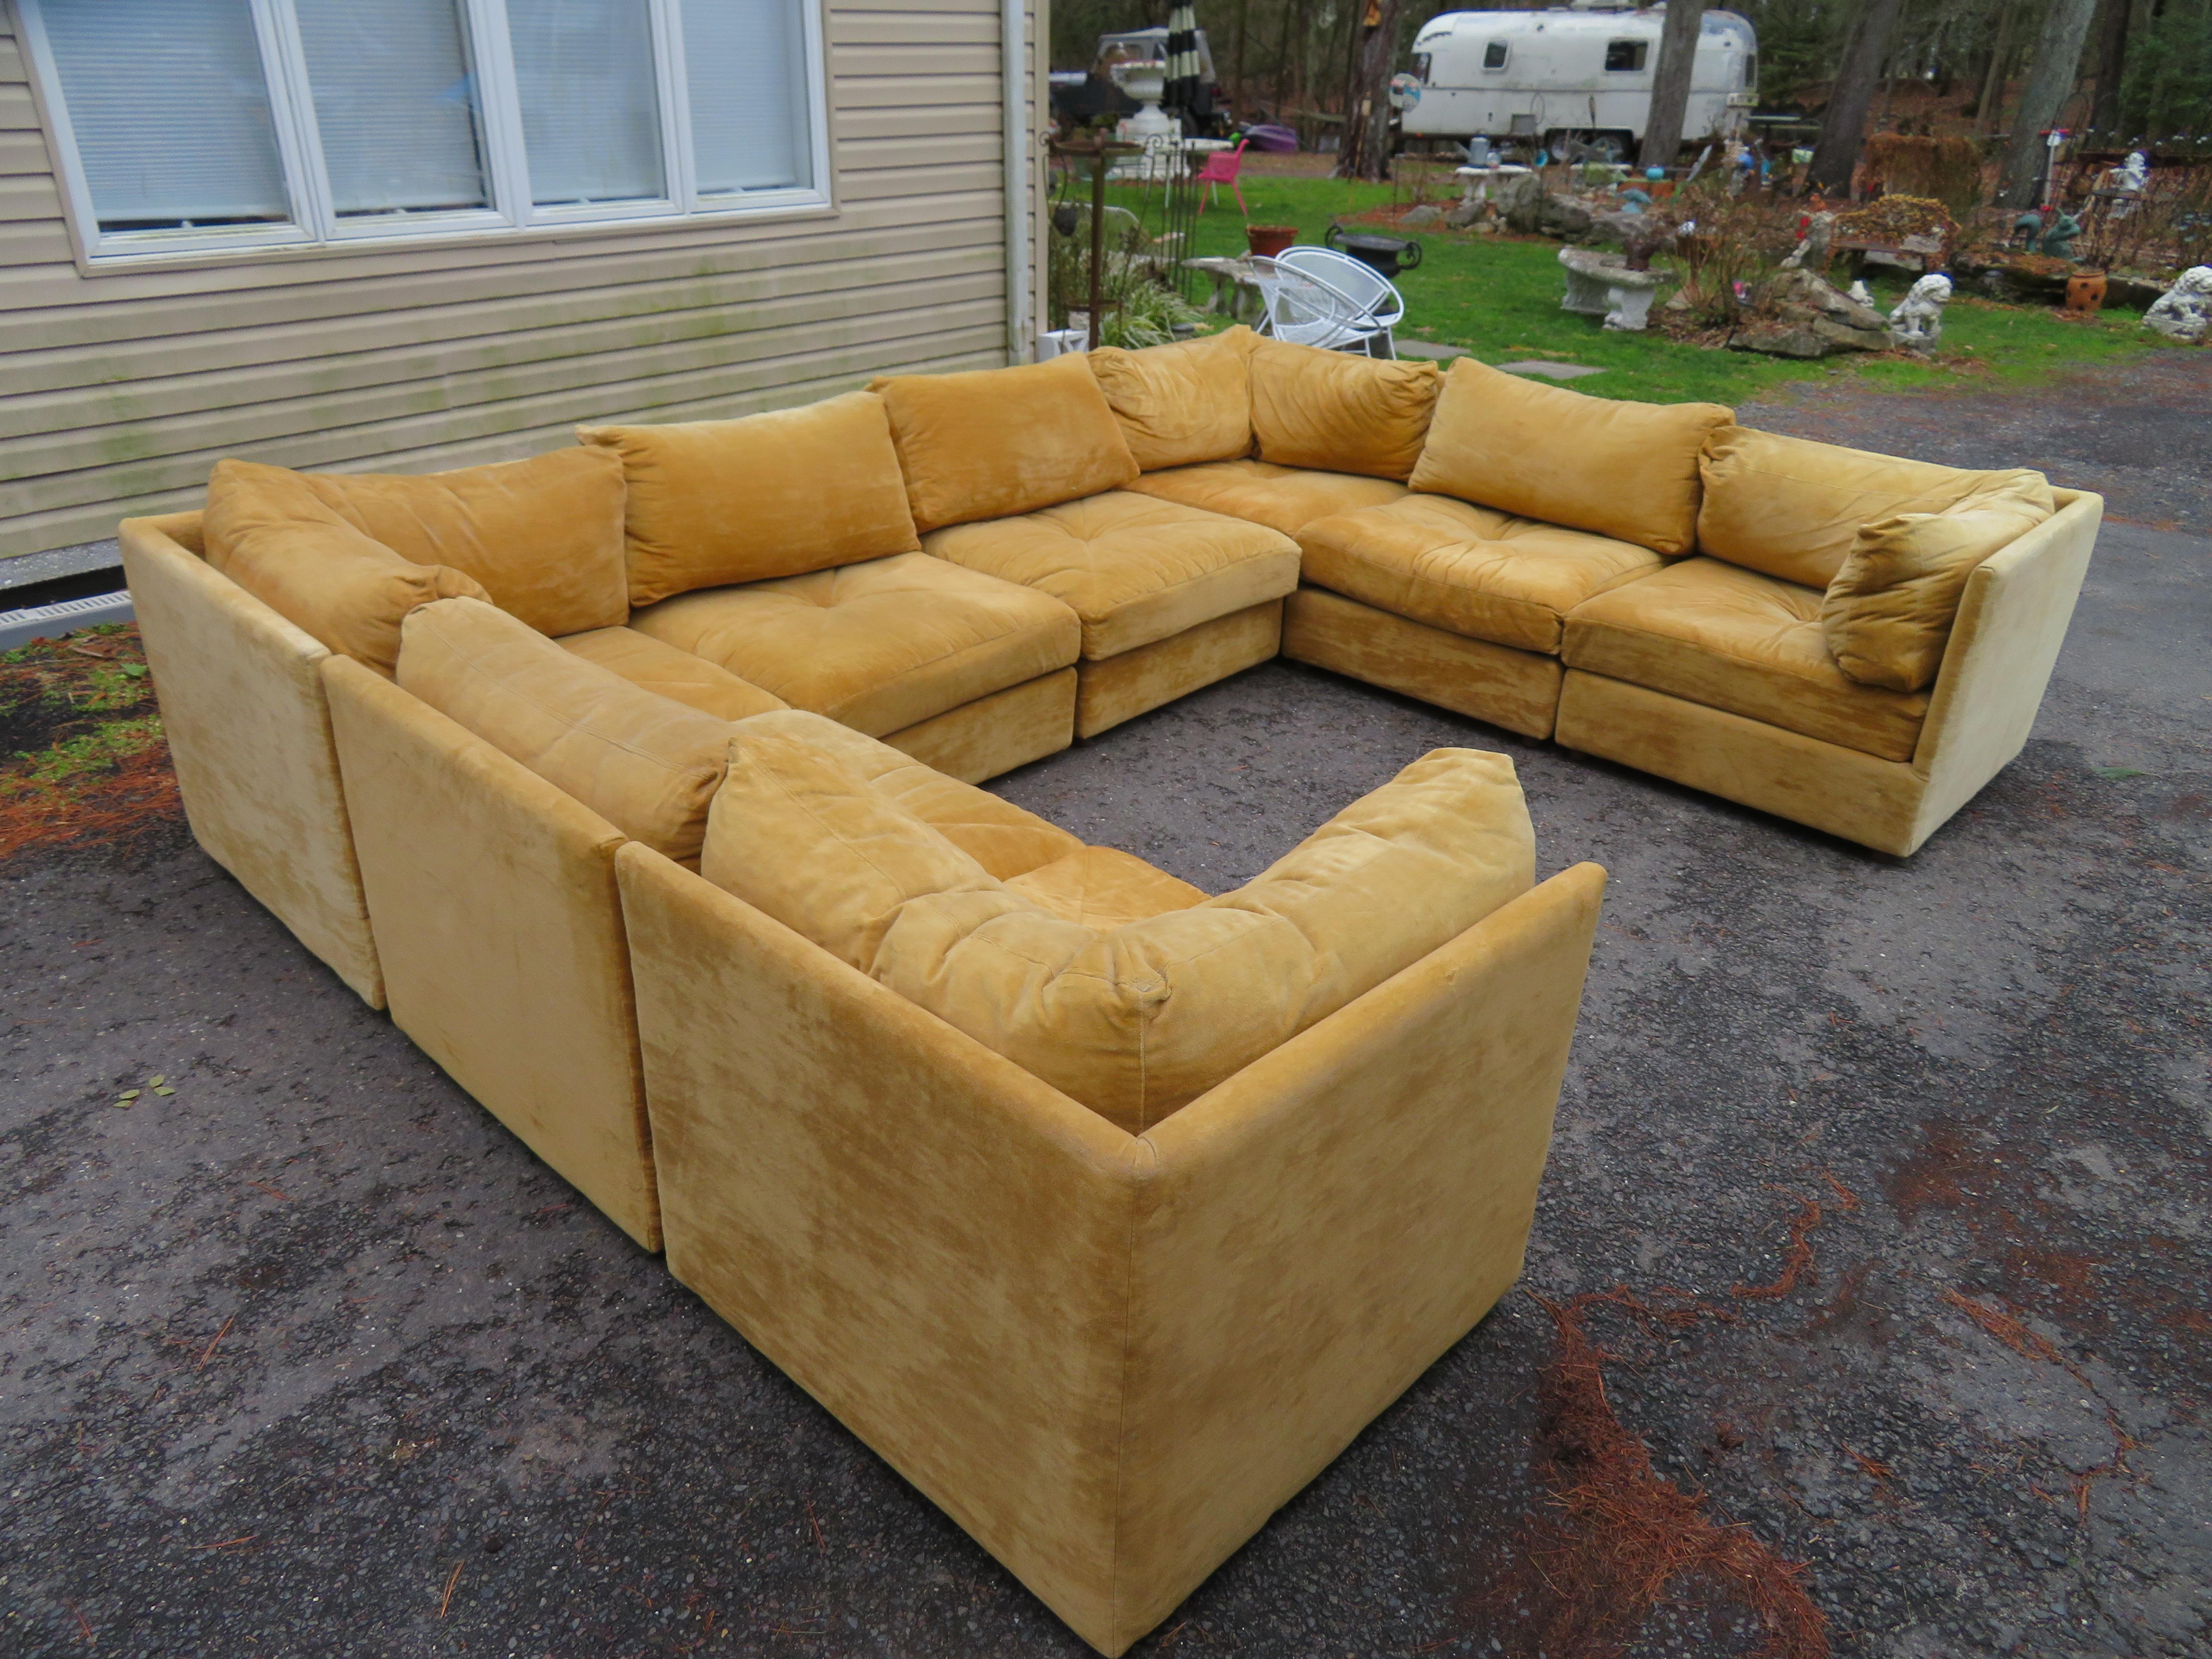 Spectacular 8-piece Milo Baughman style cube sectional sofa. We love this super clean tan velvet sectional in remarkable original condition-shows only minor signs of age. During the mid-century many furniture companies such as Thayer Coggin and